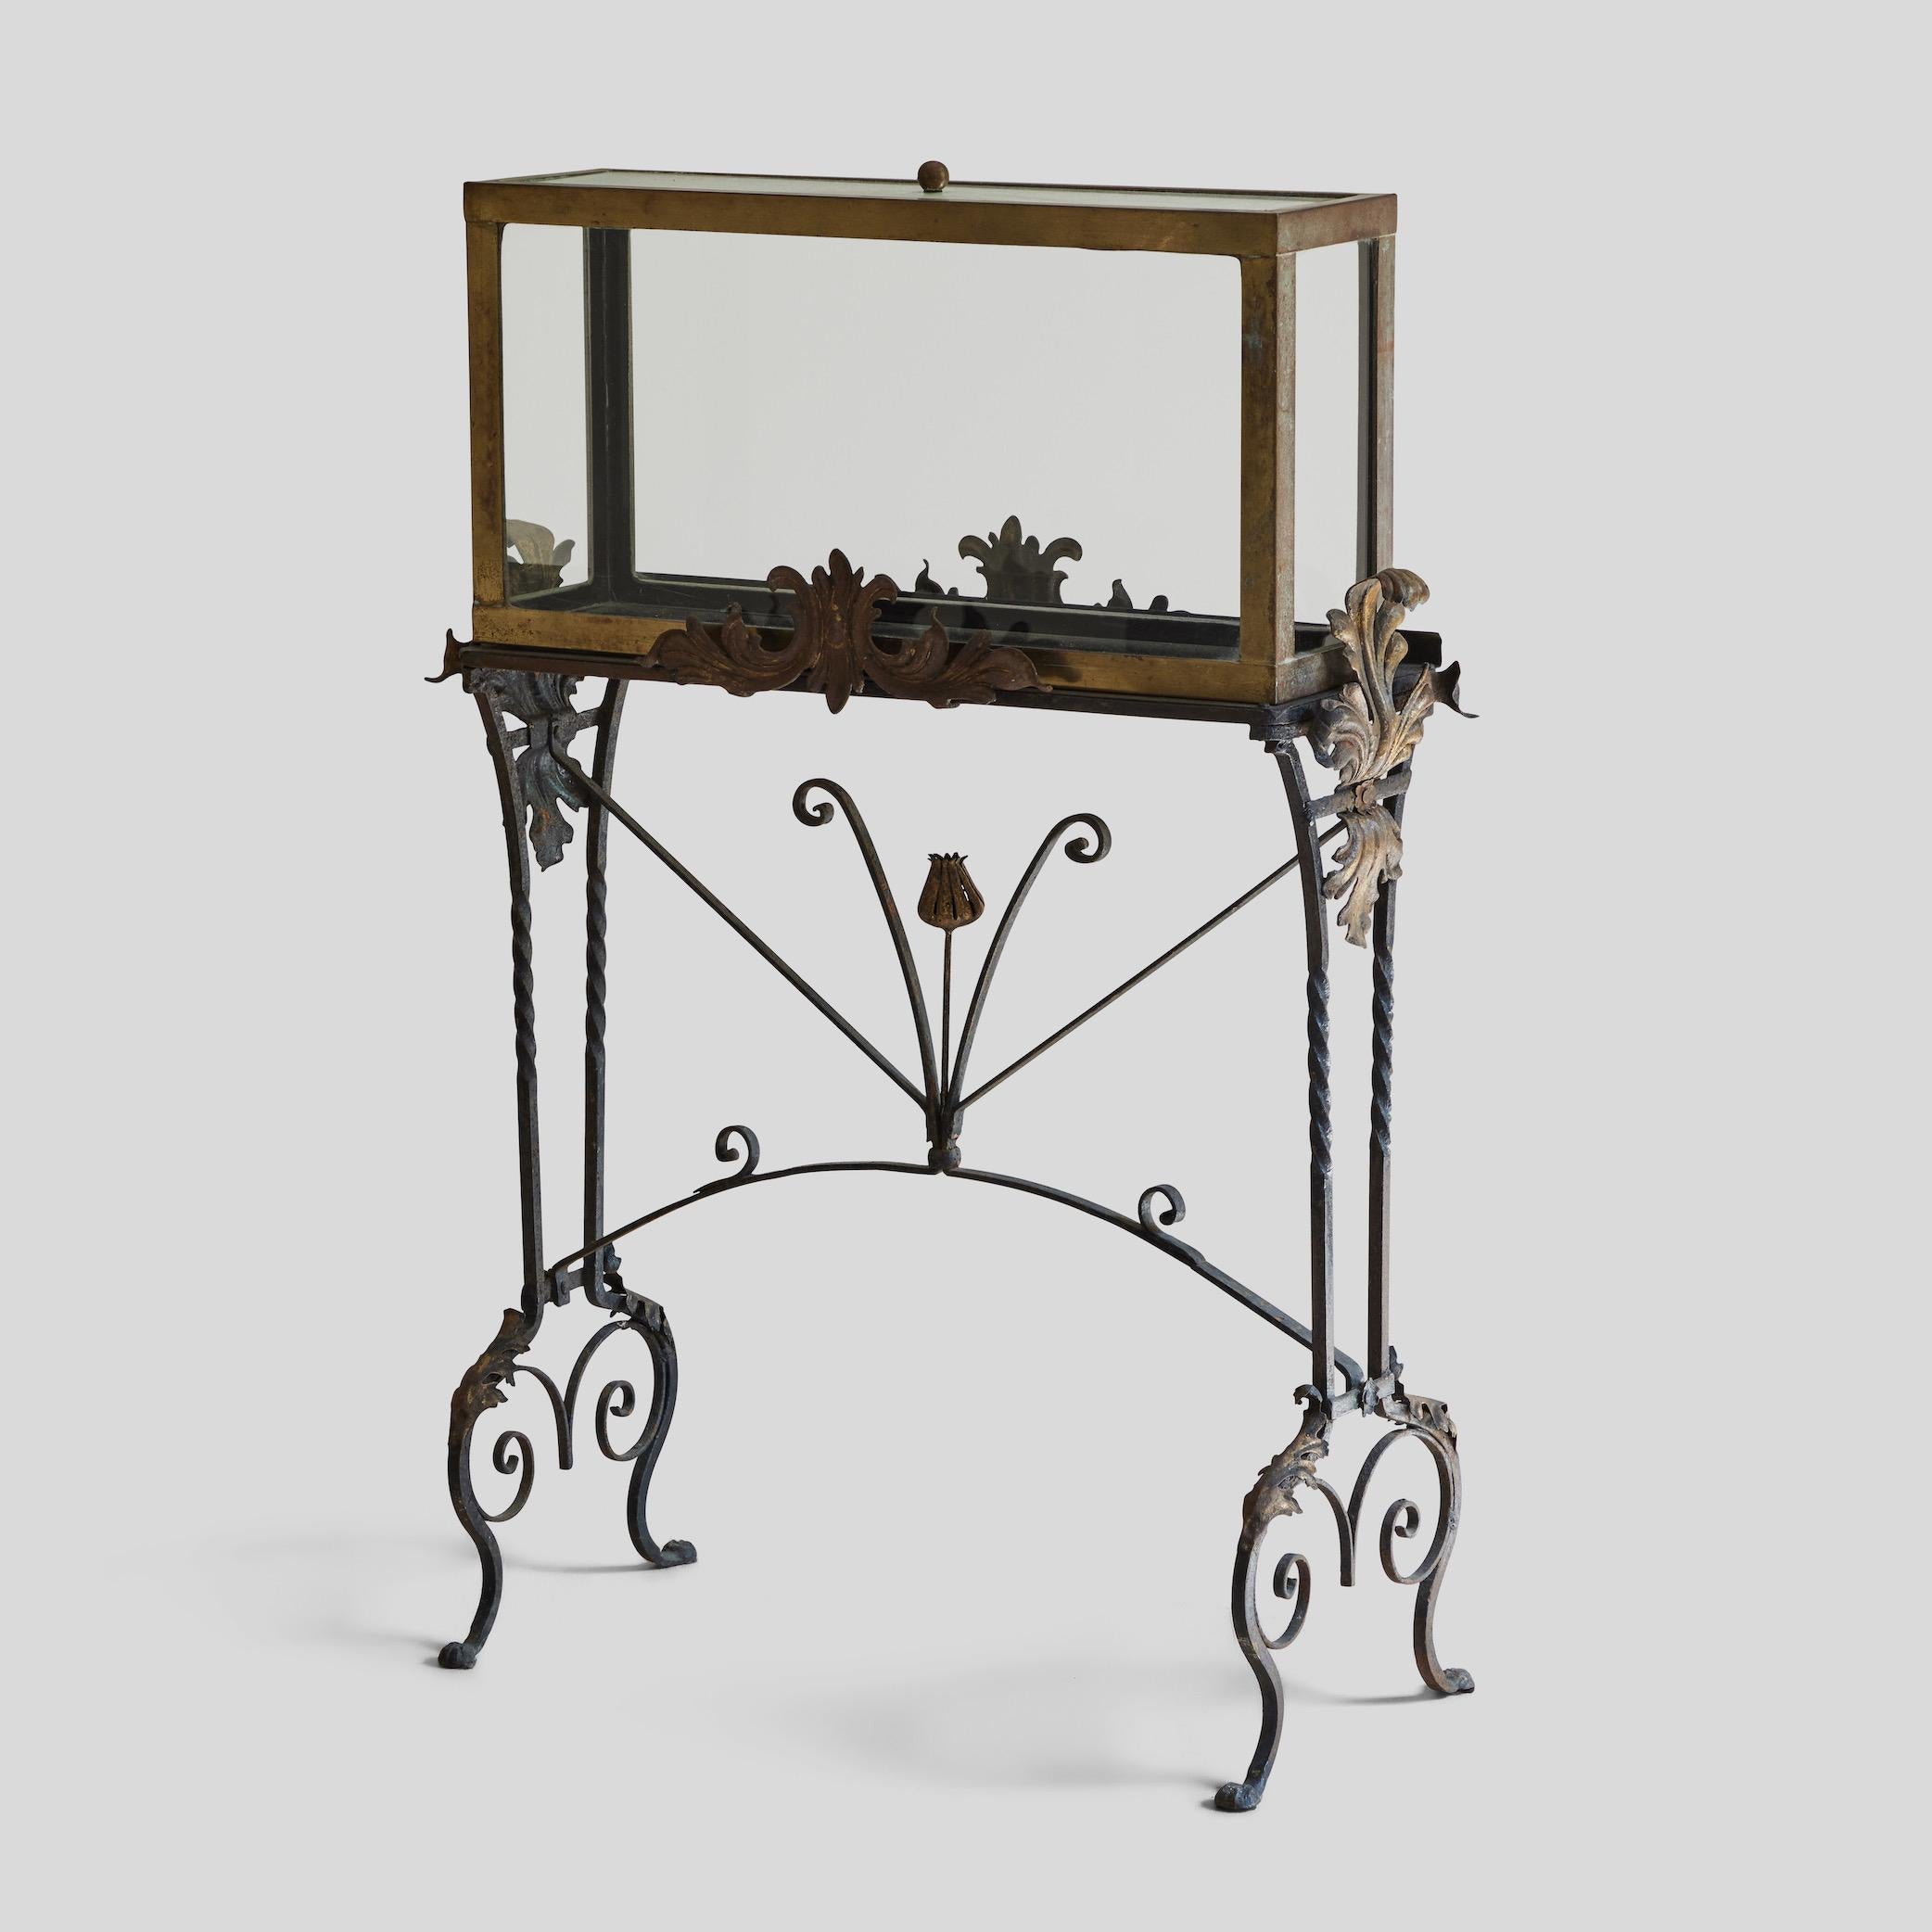 This brass aquarium sits atop a highly adorned iron stand, and a has a textured glass lid. Dating from 1940s Spain, this piece could also serve as a display case. It features a number of floral motifs and worked iron details that make this piece